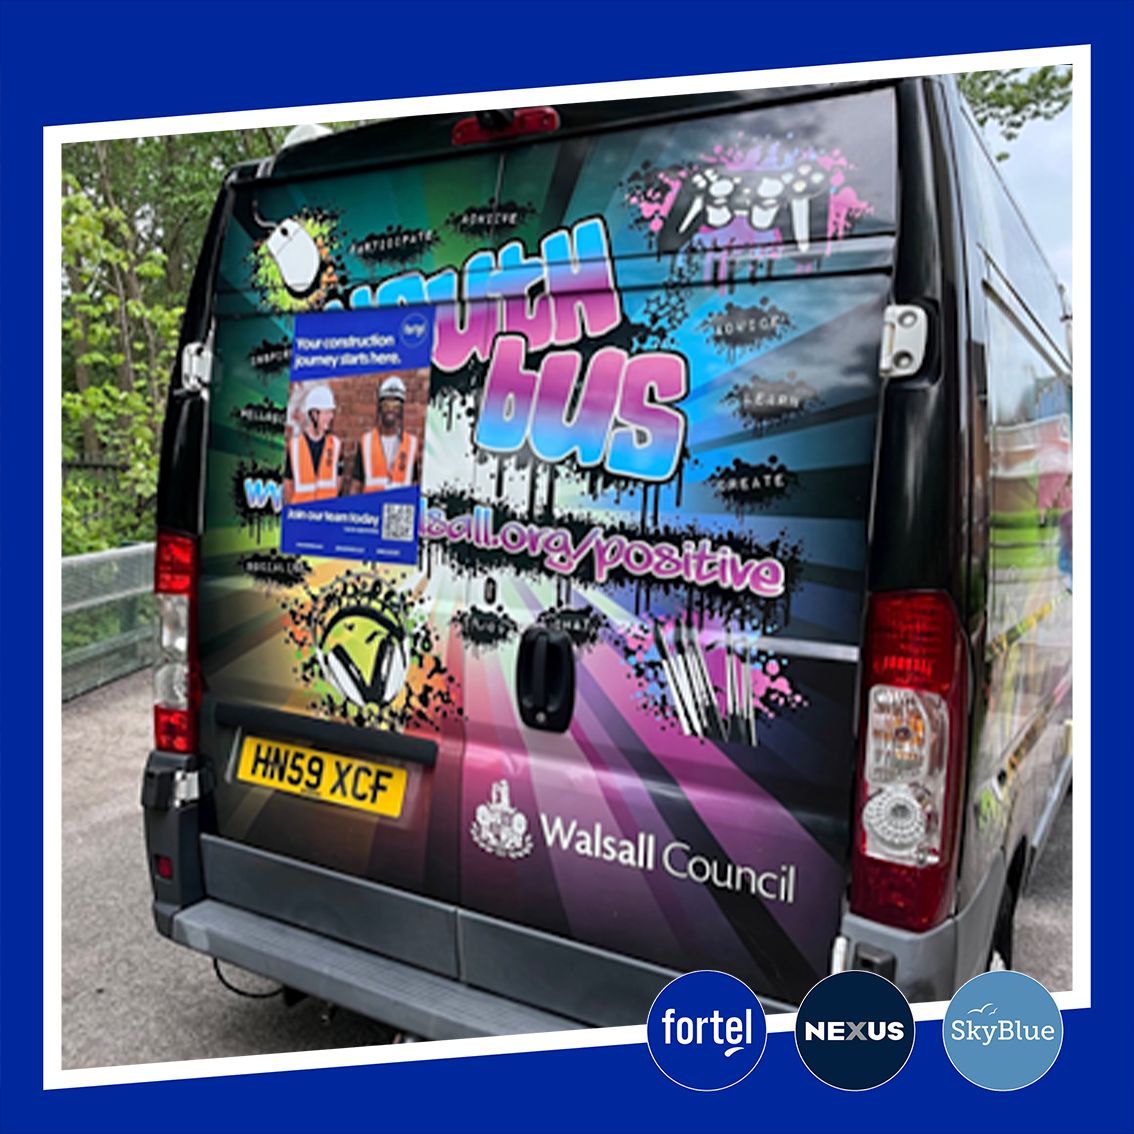 🚌 Have you spotted the #YouthBus cruising the streets of #Walsall?

We've been supporting the @Bloxwich Community Partnership in financing its Youth Bus project. 

This provides a secure space for youth workers to engage in issue-based discussions with young people. 👥

#Fortel